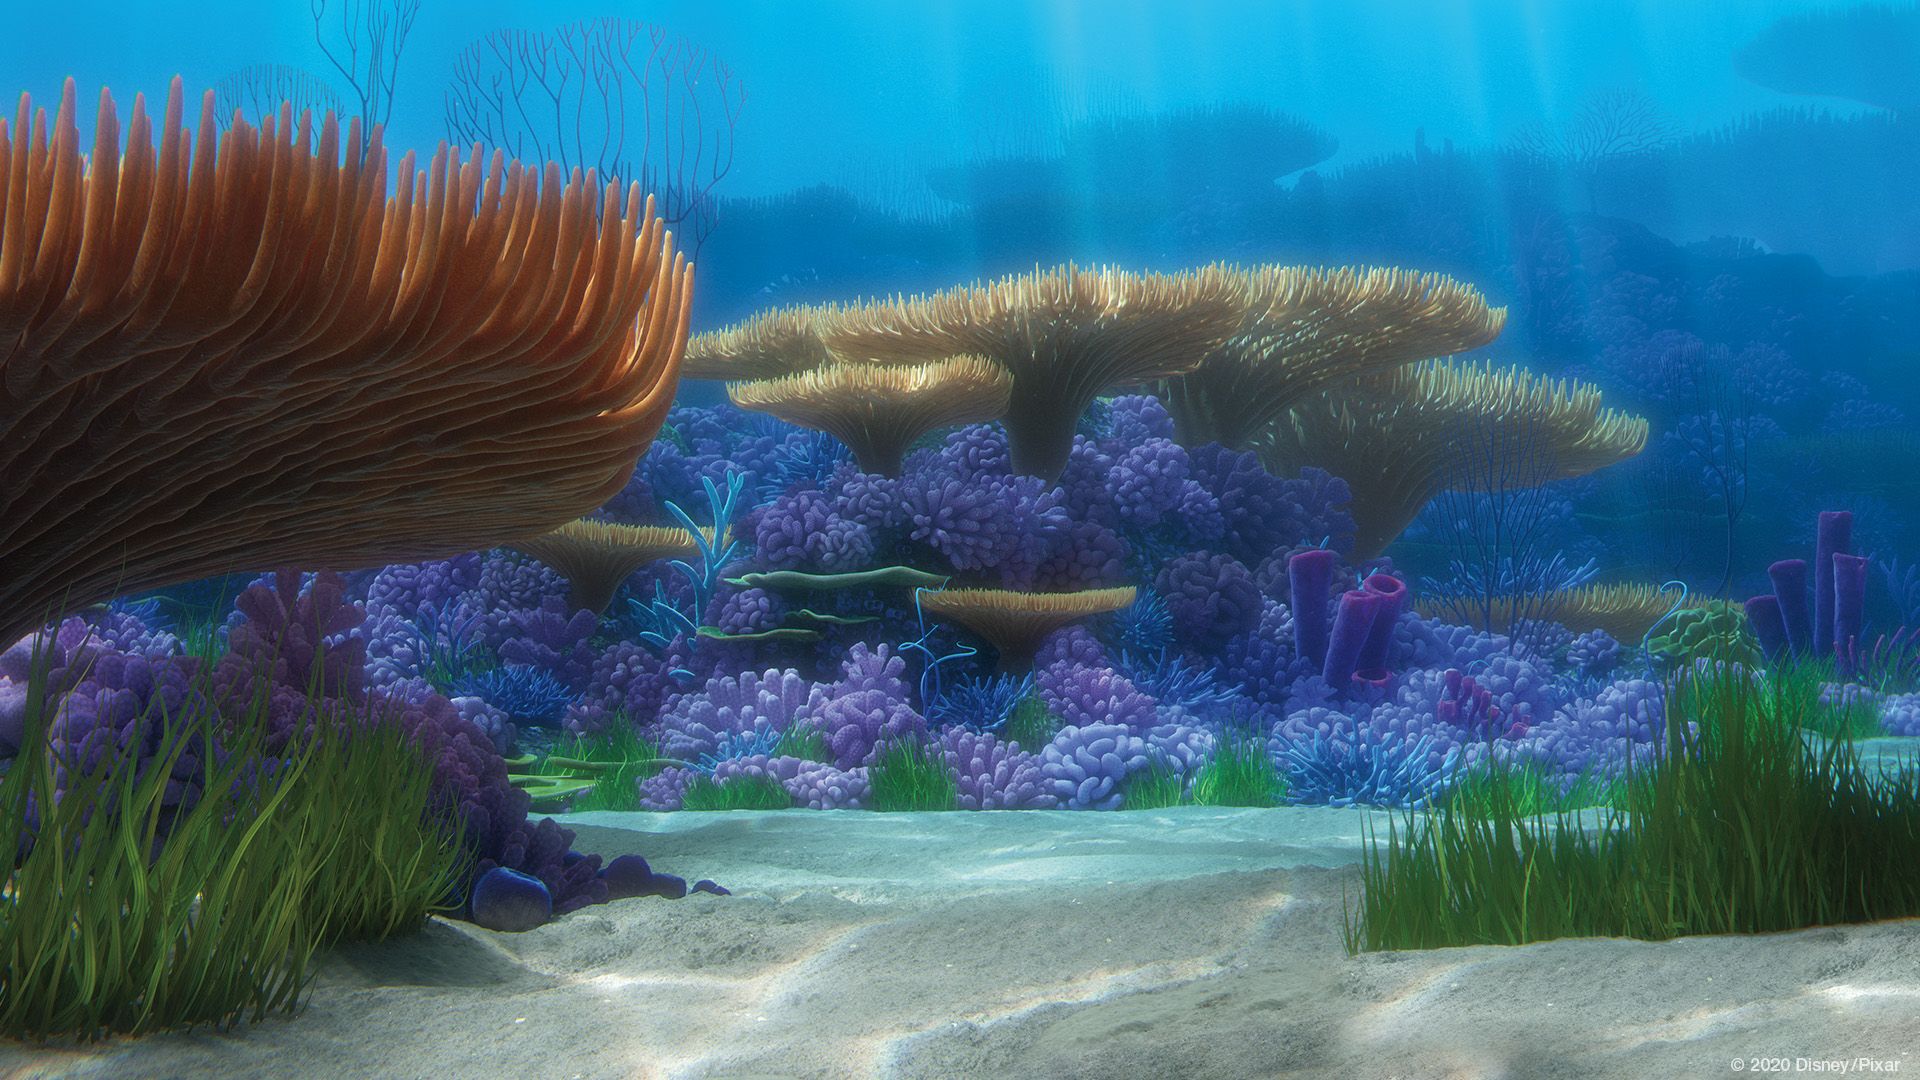 Pixar's Free Zoom Background Jazz Up Meetings With 'Finding Nemo' & More